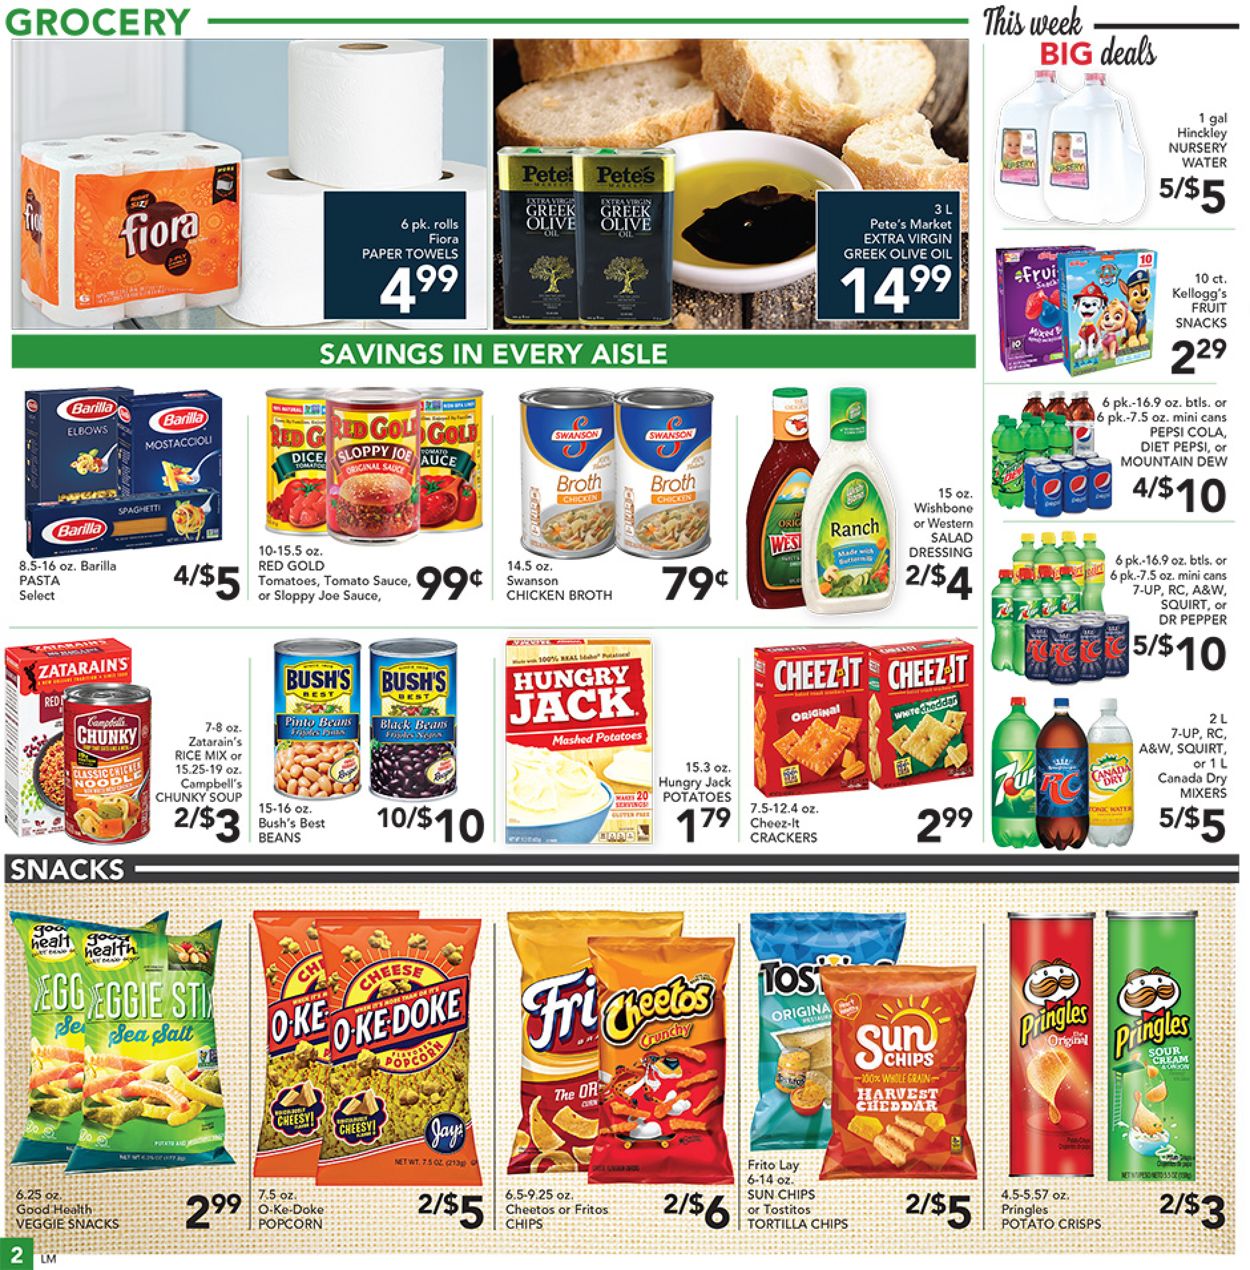 Catalogue Pete's Fresh Market from 11/04/2020